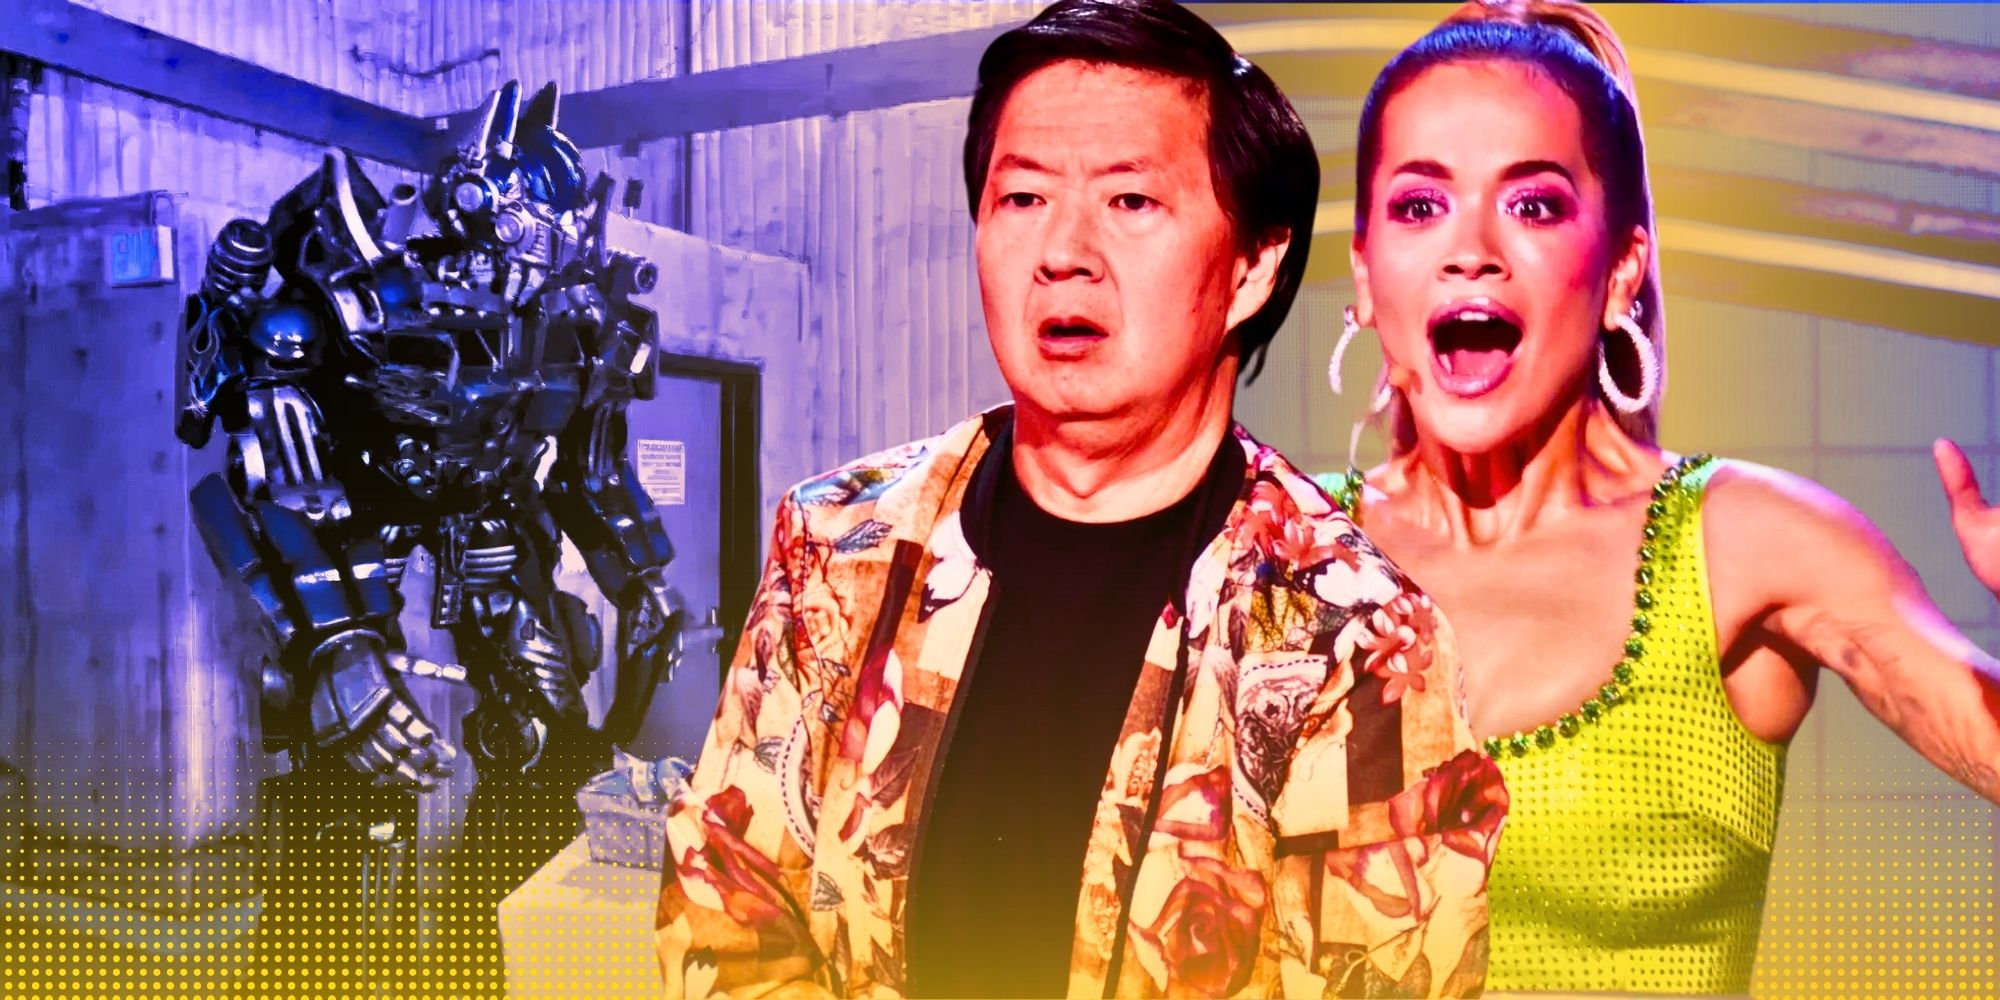 The Masked Singer panelists Ken Jeong and Rita Ora looking stunned with a Transformers character